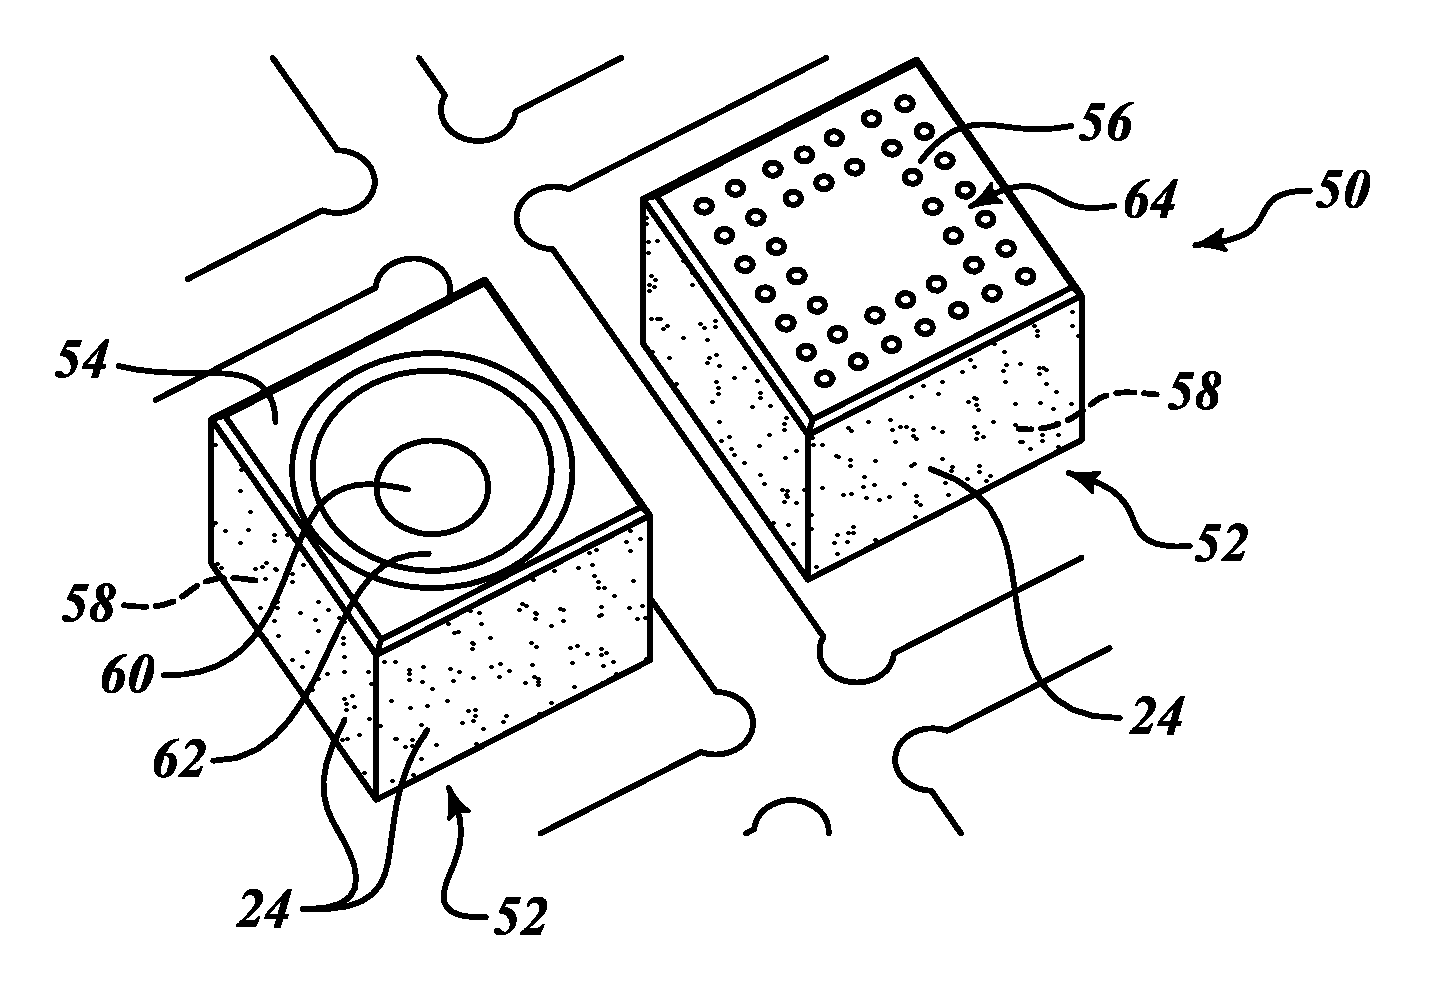 Use of conductive paint as a method of electromagnetic interference shielding on semiconductor devices